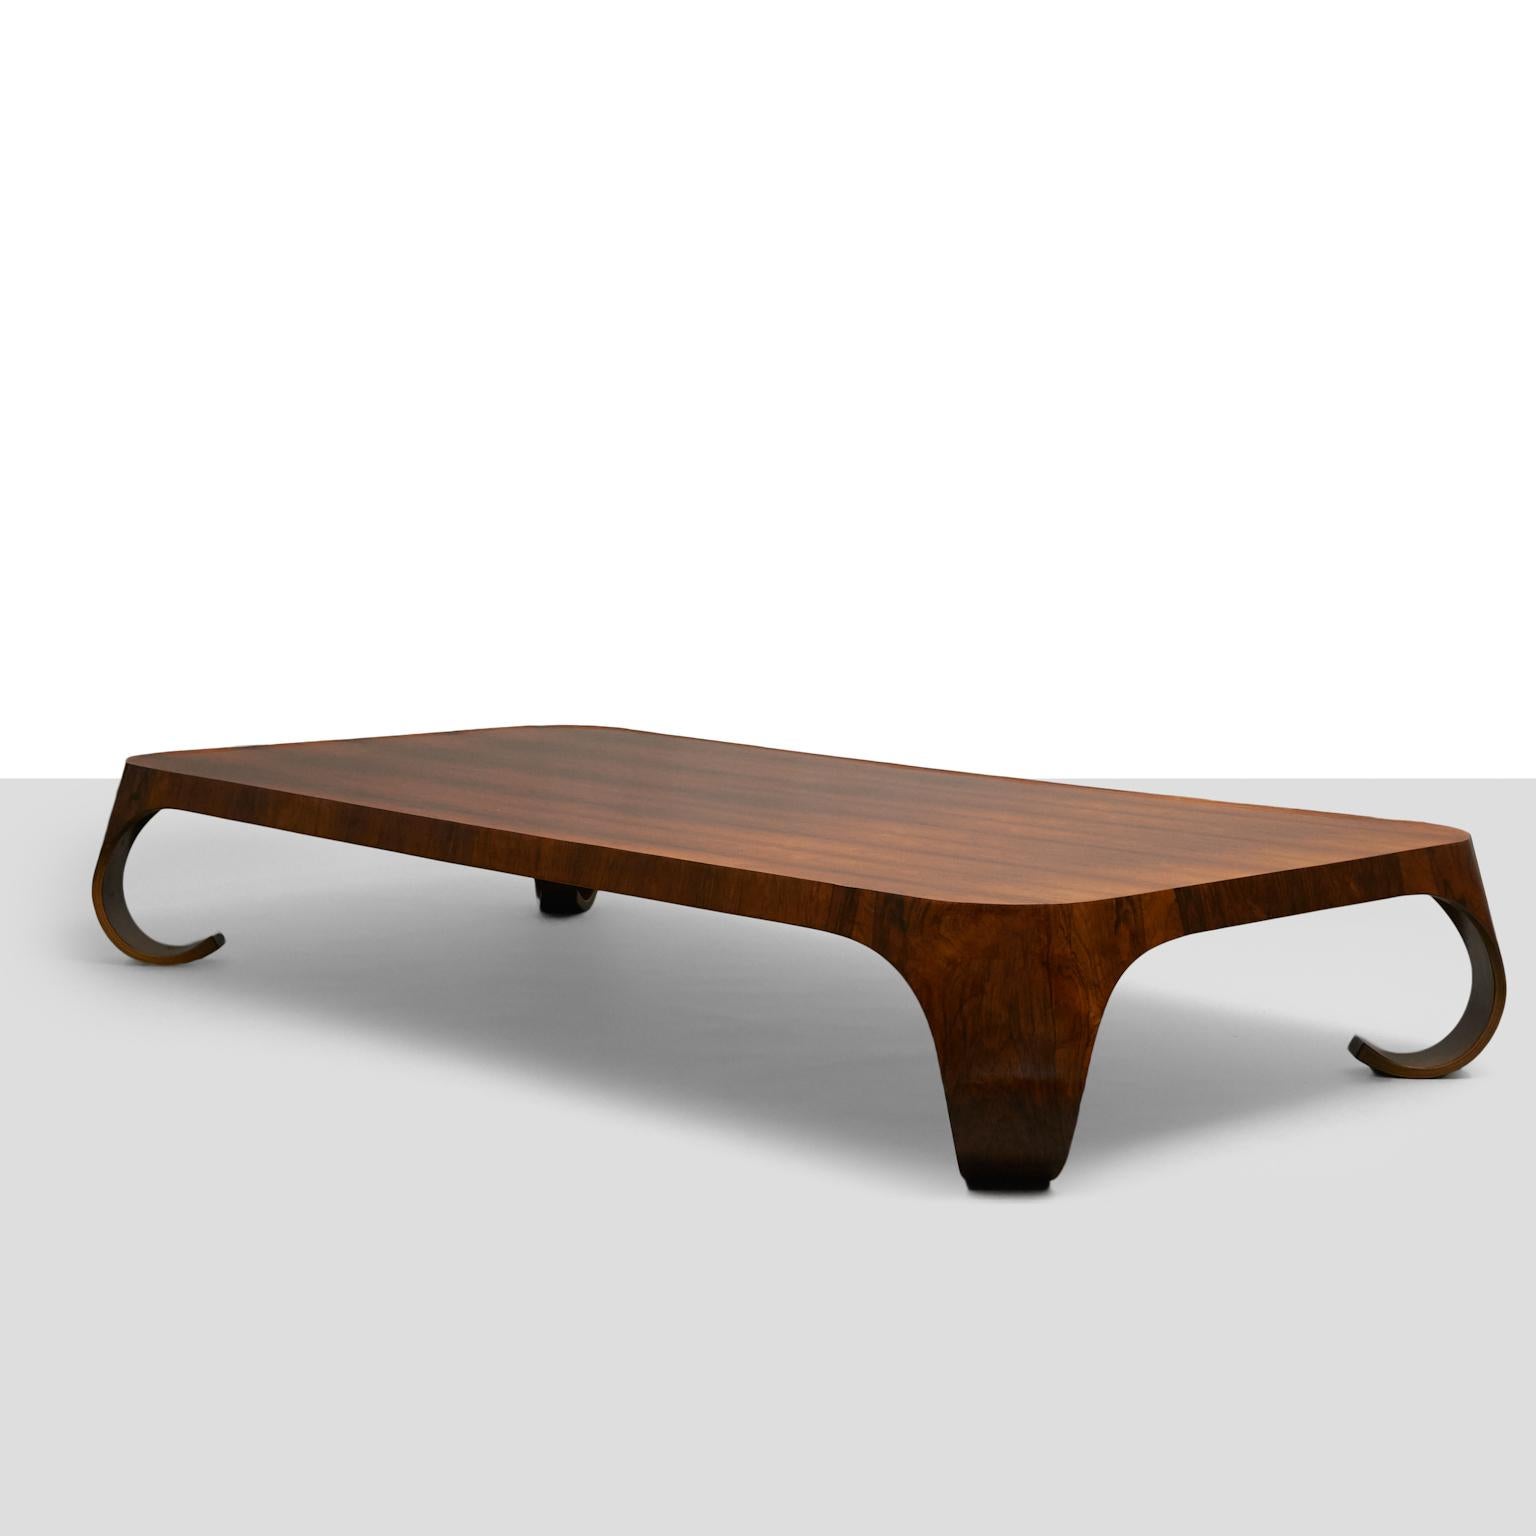 A rosewood coffee table by Isamu Kenmochi. This piece is longer and lower than standard models. Manufactured by Tendo Mokko.
Literature: Japanese Modern, Mori, pg. 143.